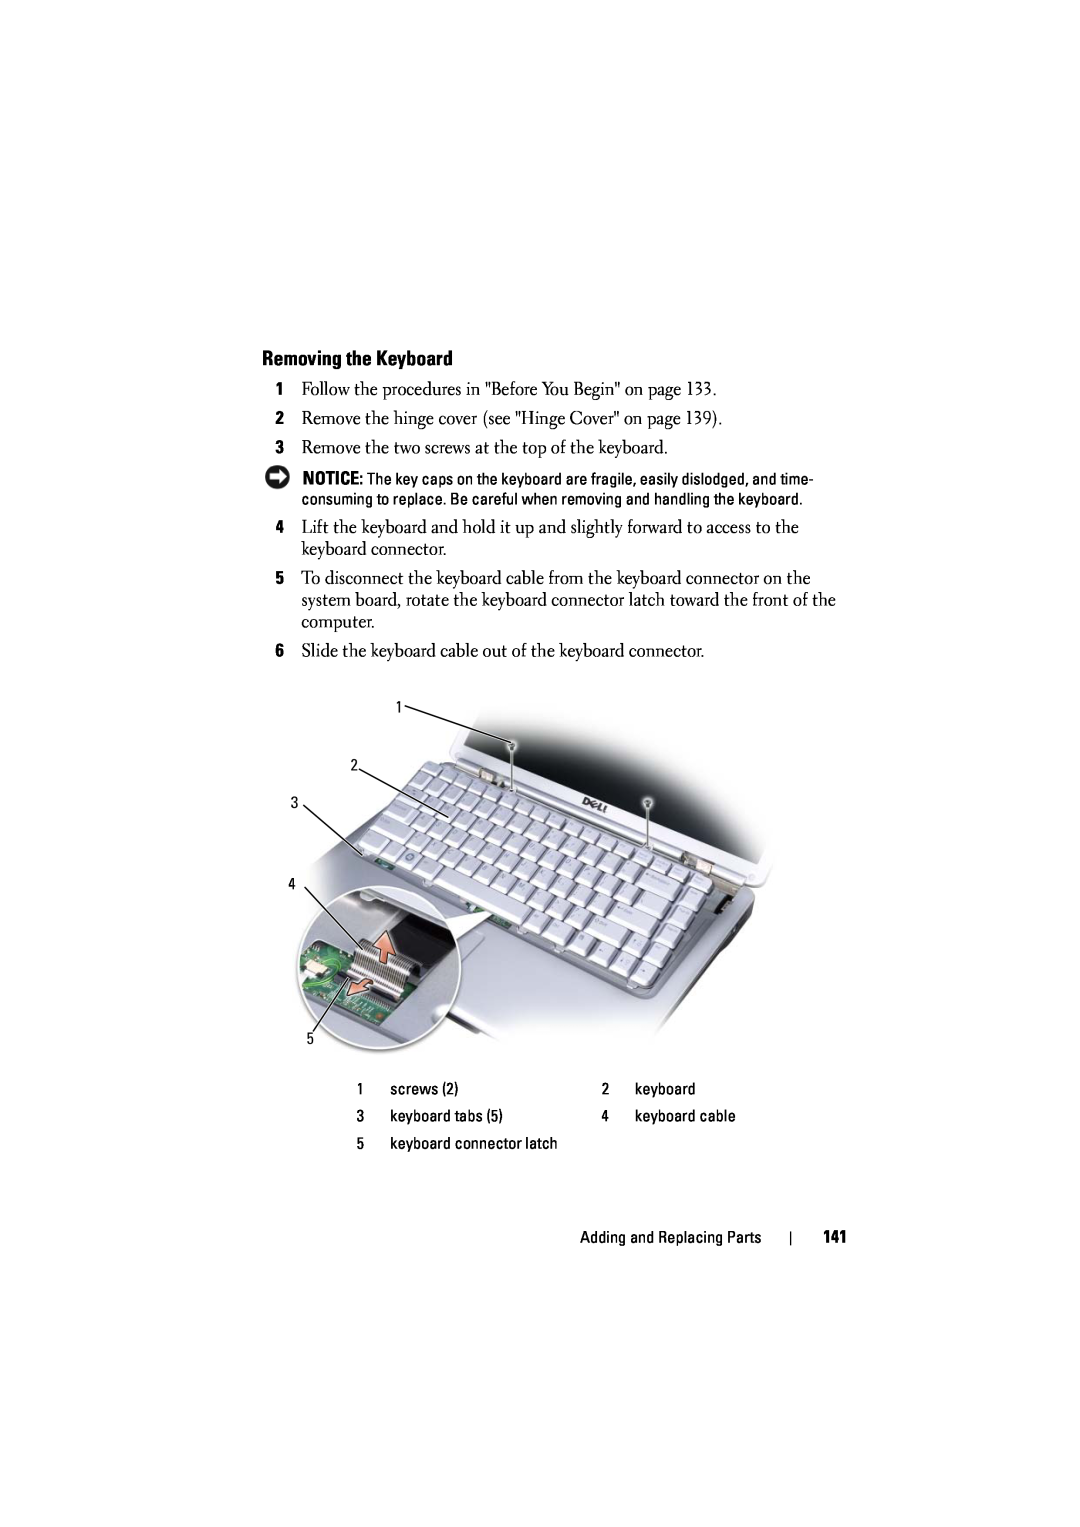 Dell 1526, 1525 owner manual Removing the Keyboard, keyboard cable 